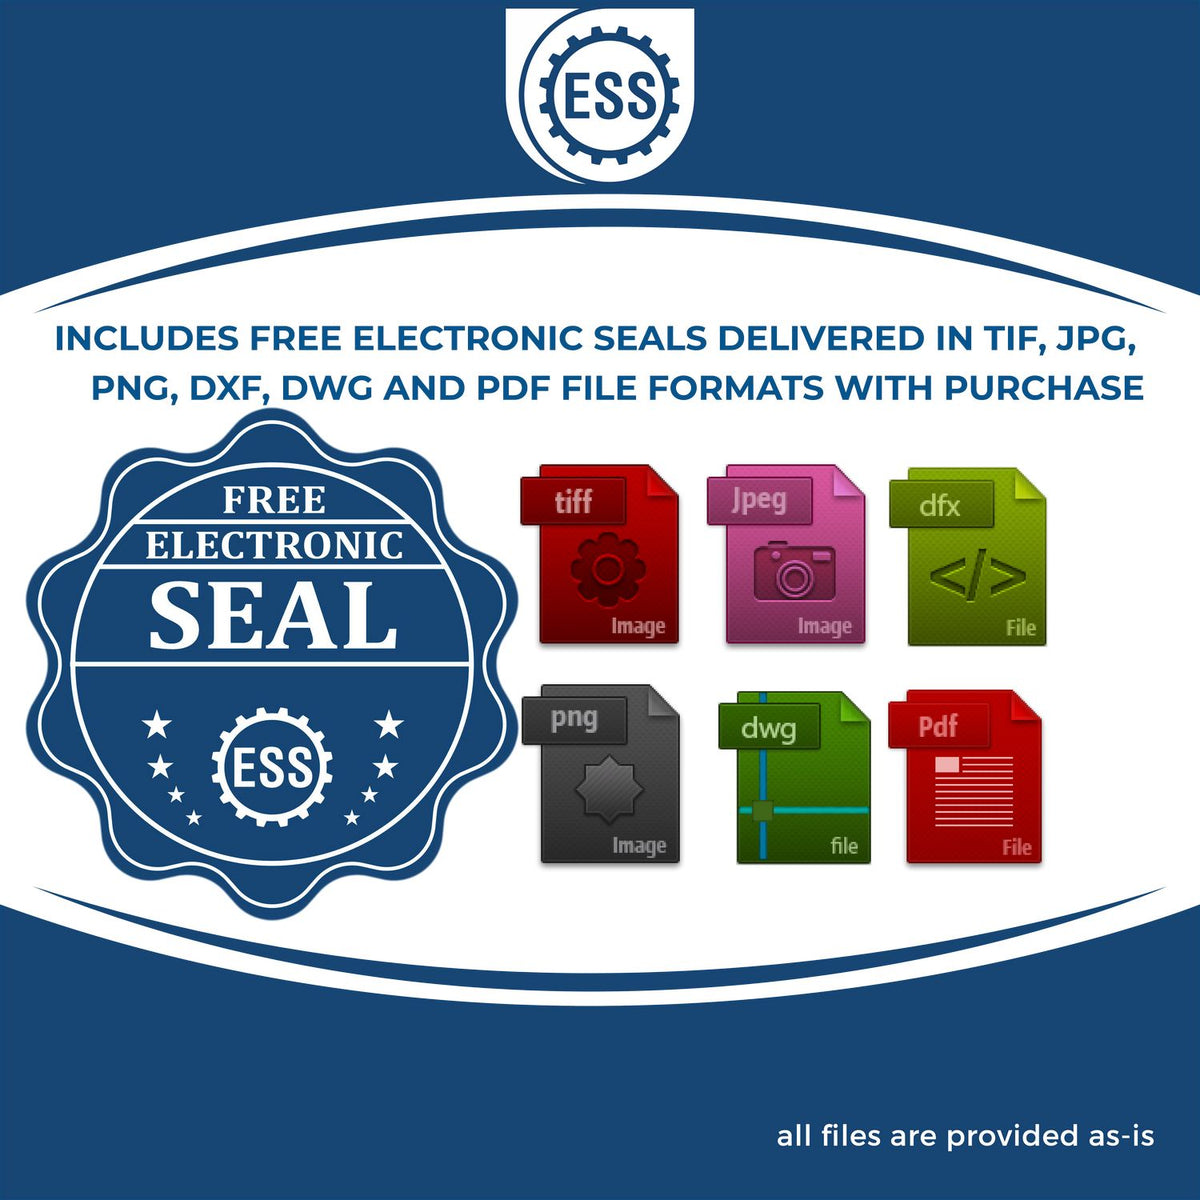 An infographic for the free electronic seal for the Slim Pre-Inked Maryland Architect Seal Stamp illustrating the different file type icons such as DXF, DWG, TIF, JPG and PNG.